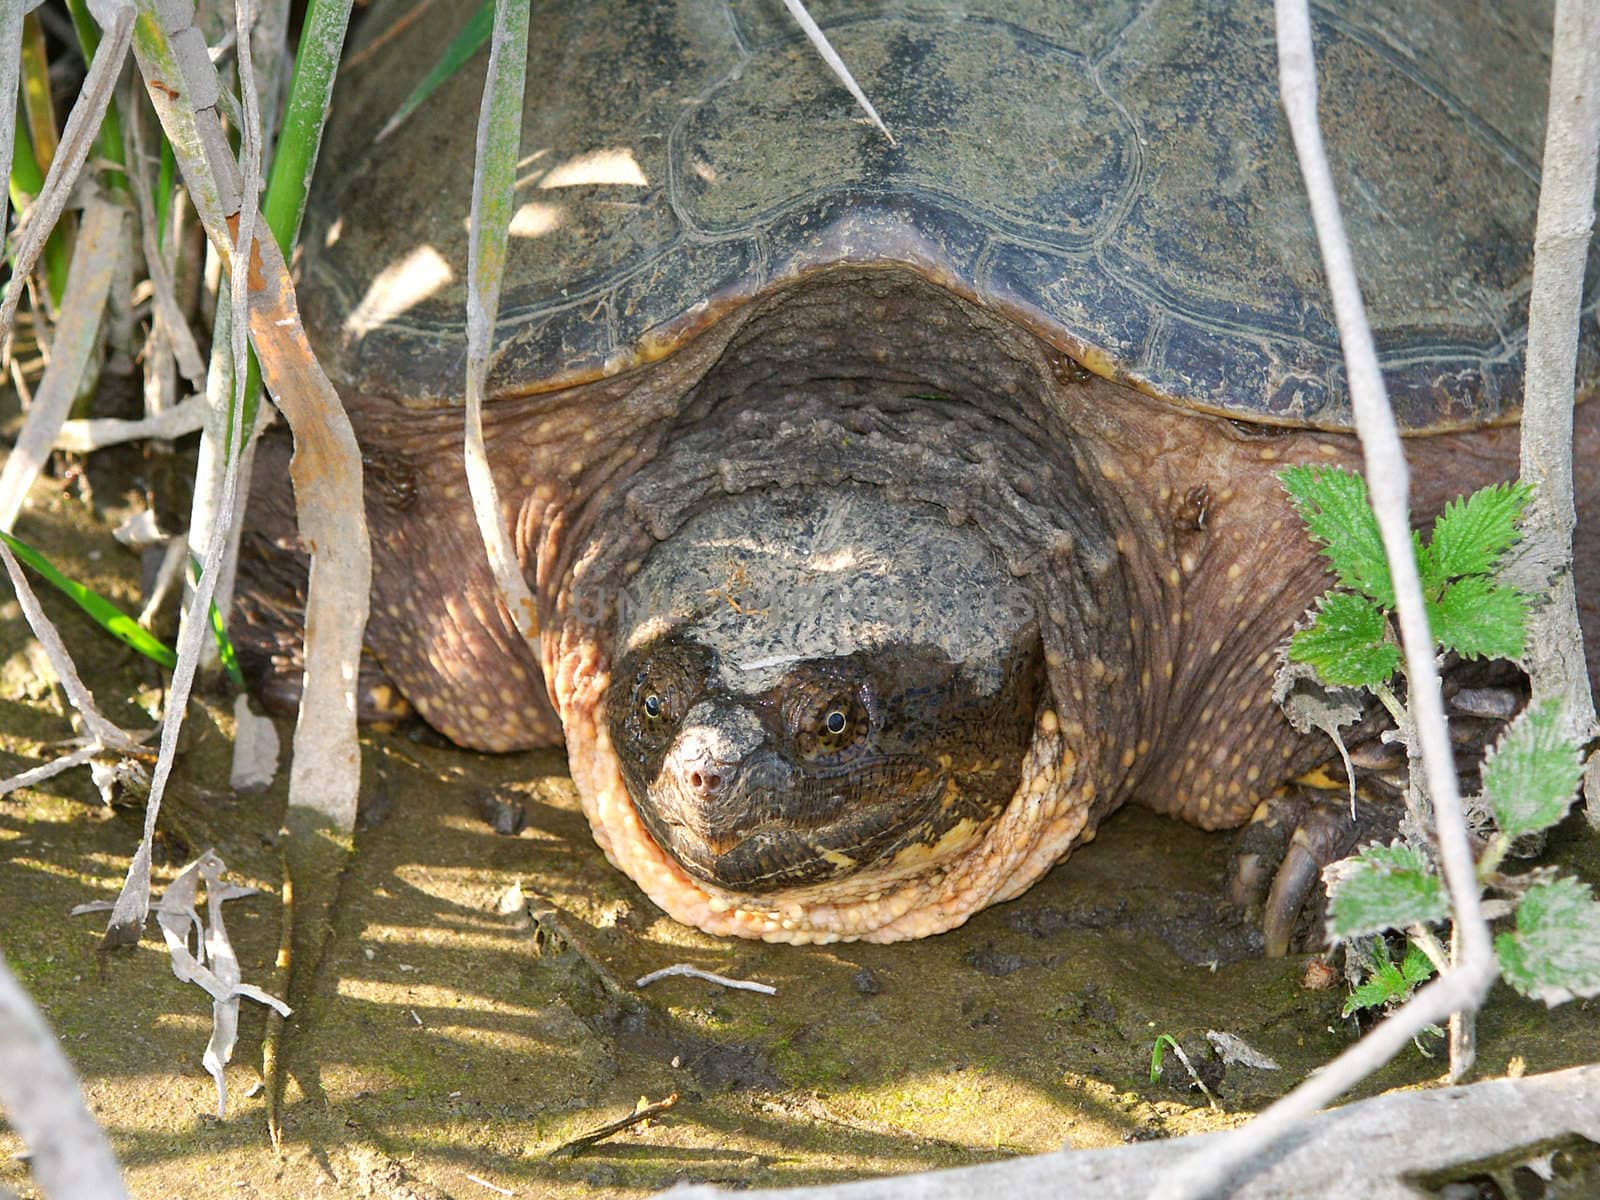 Snapping Turtle (Chelydra serpentina) by Wirepec